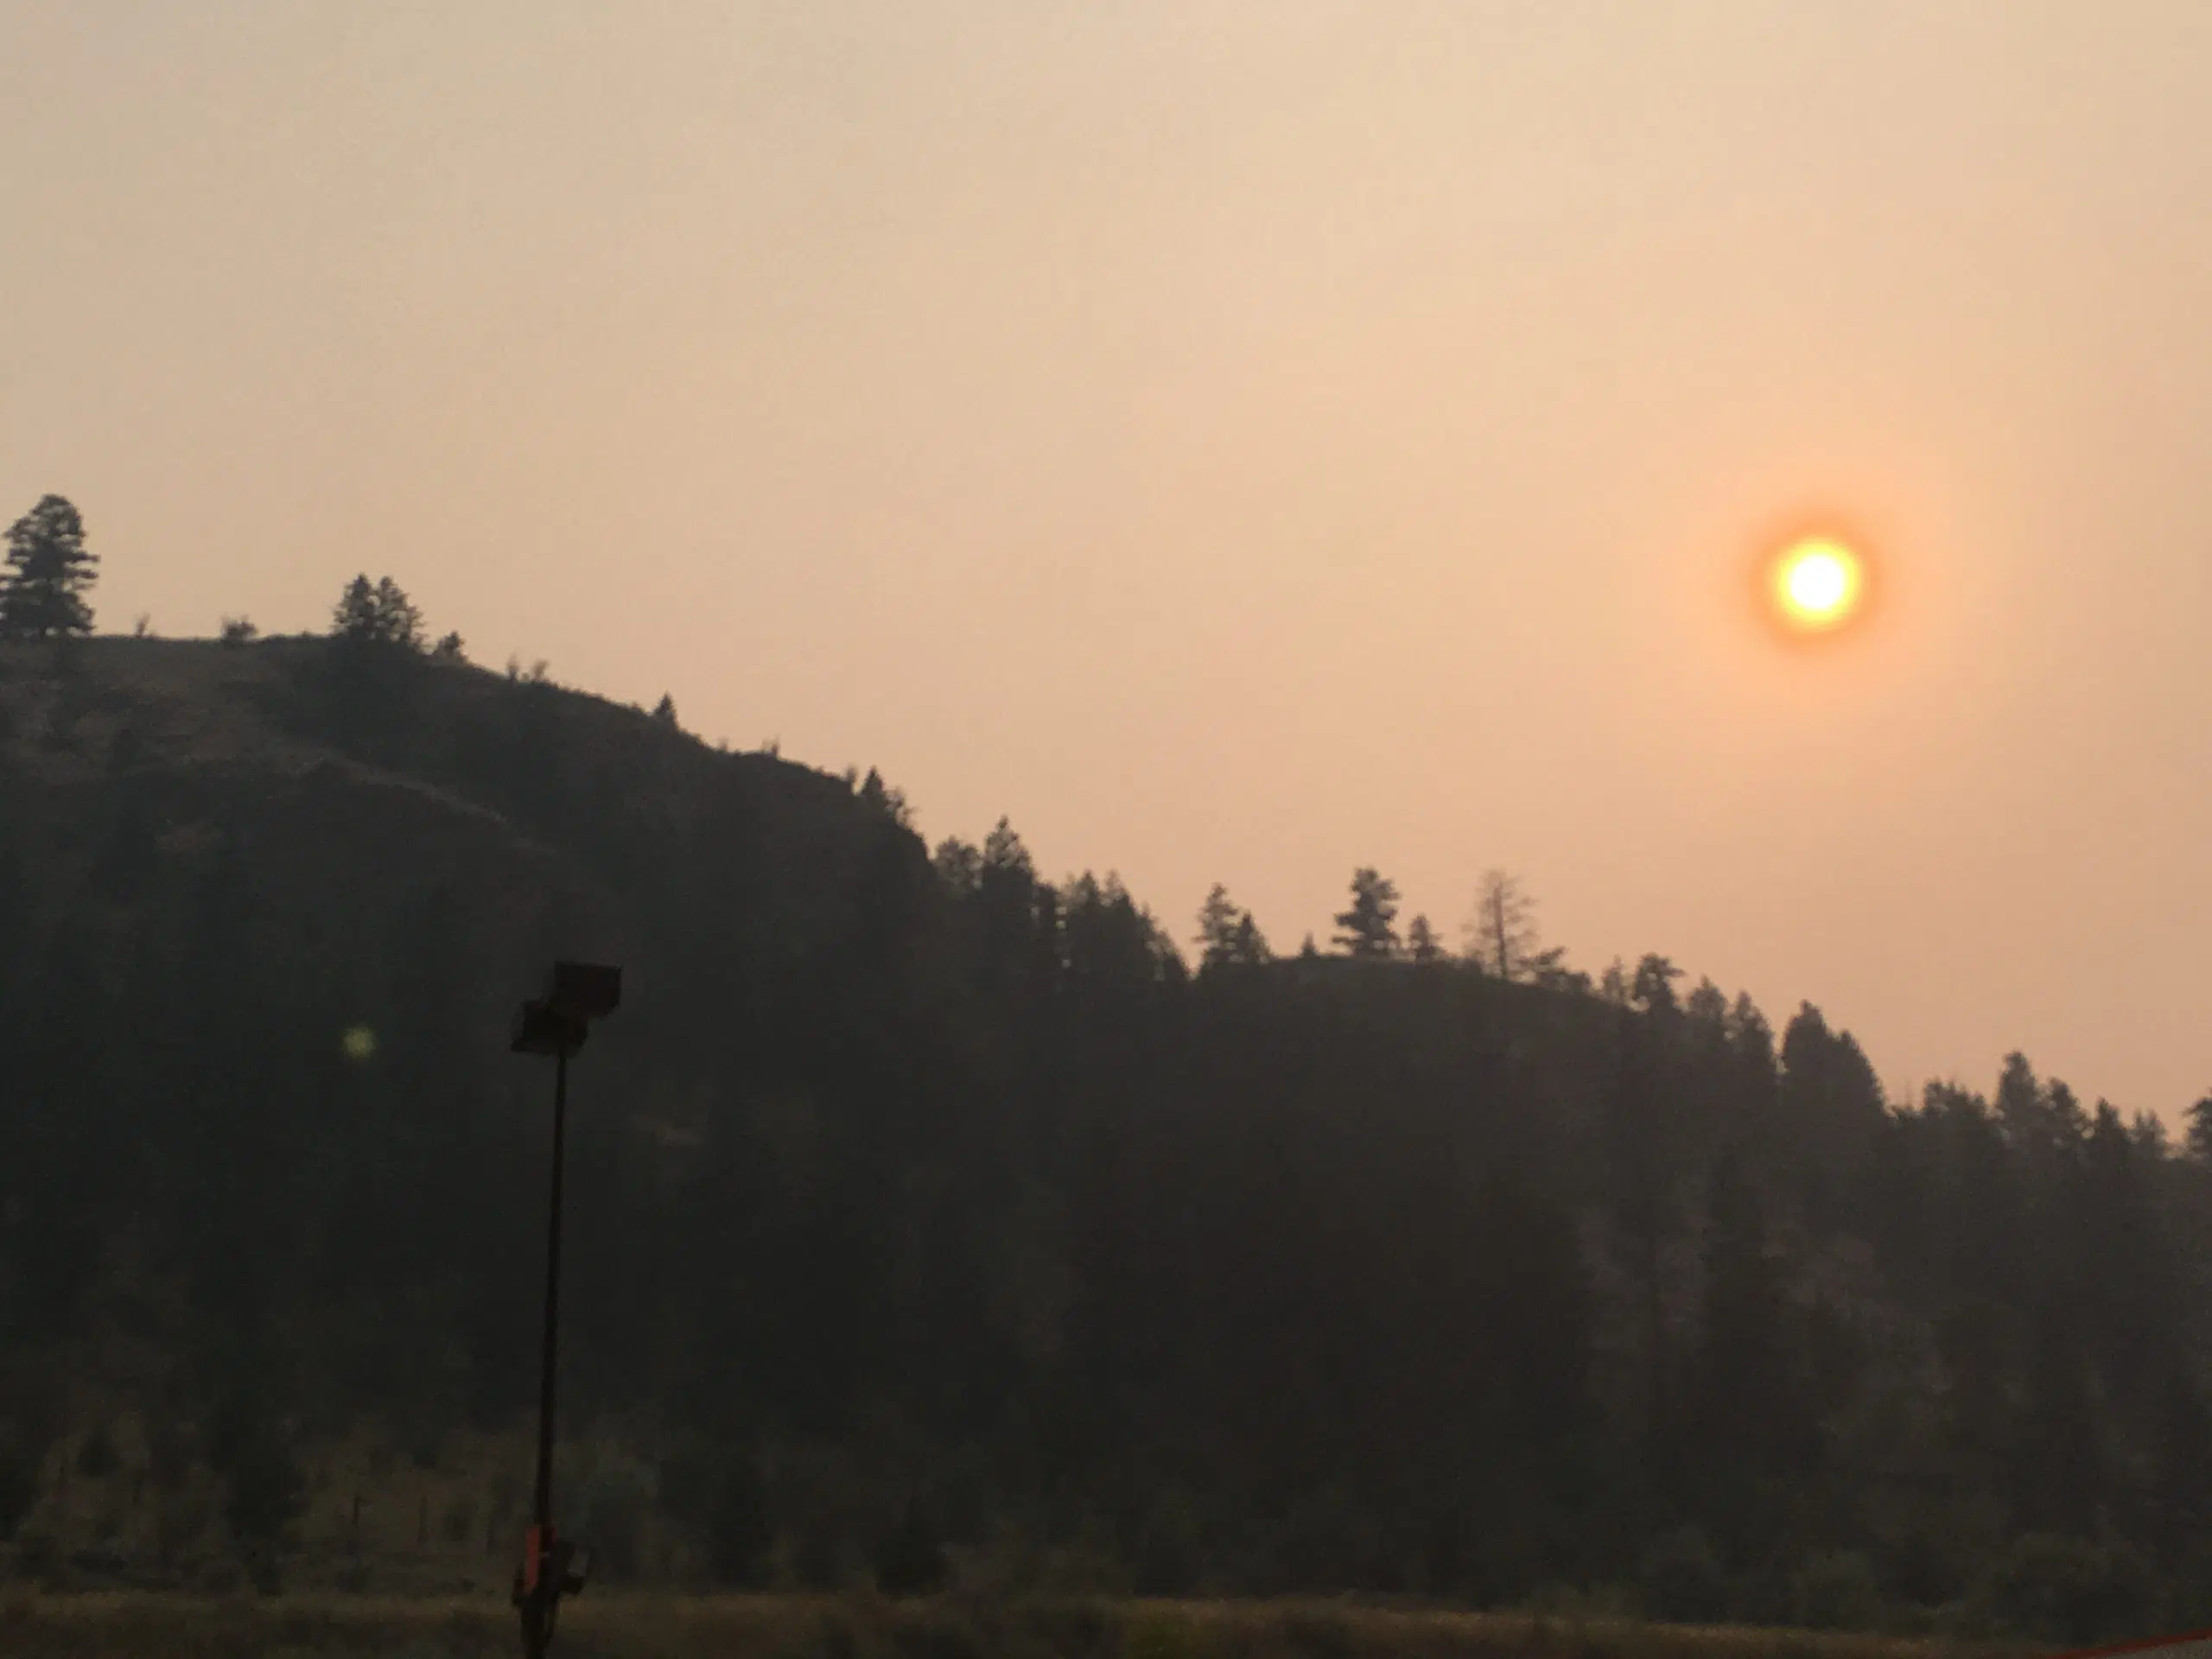 Environment Canada warning of smoke in the Kamloops area from the Spences Bridge wildfire